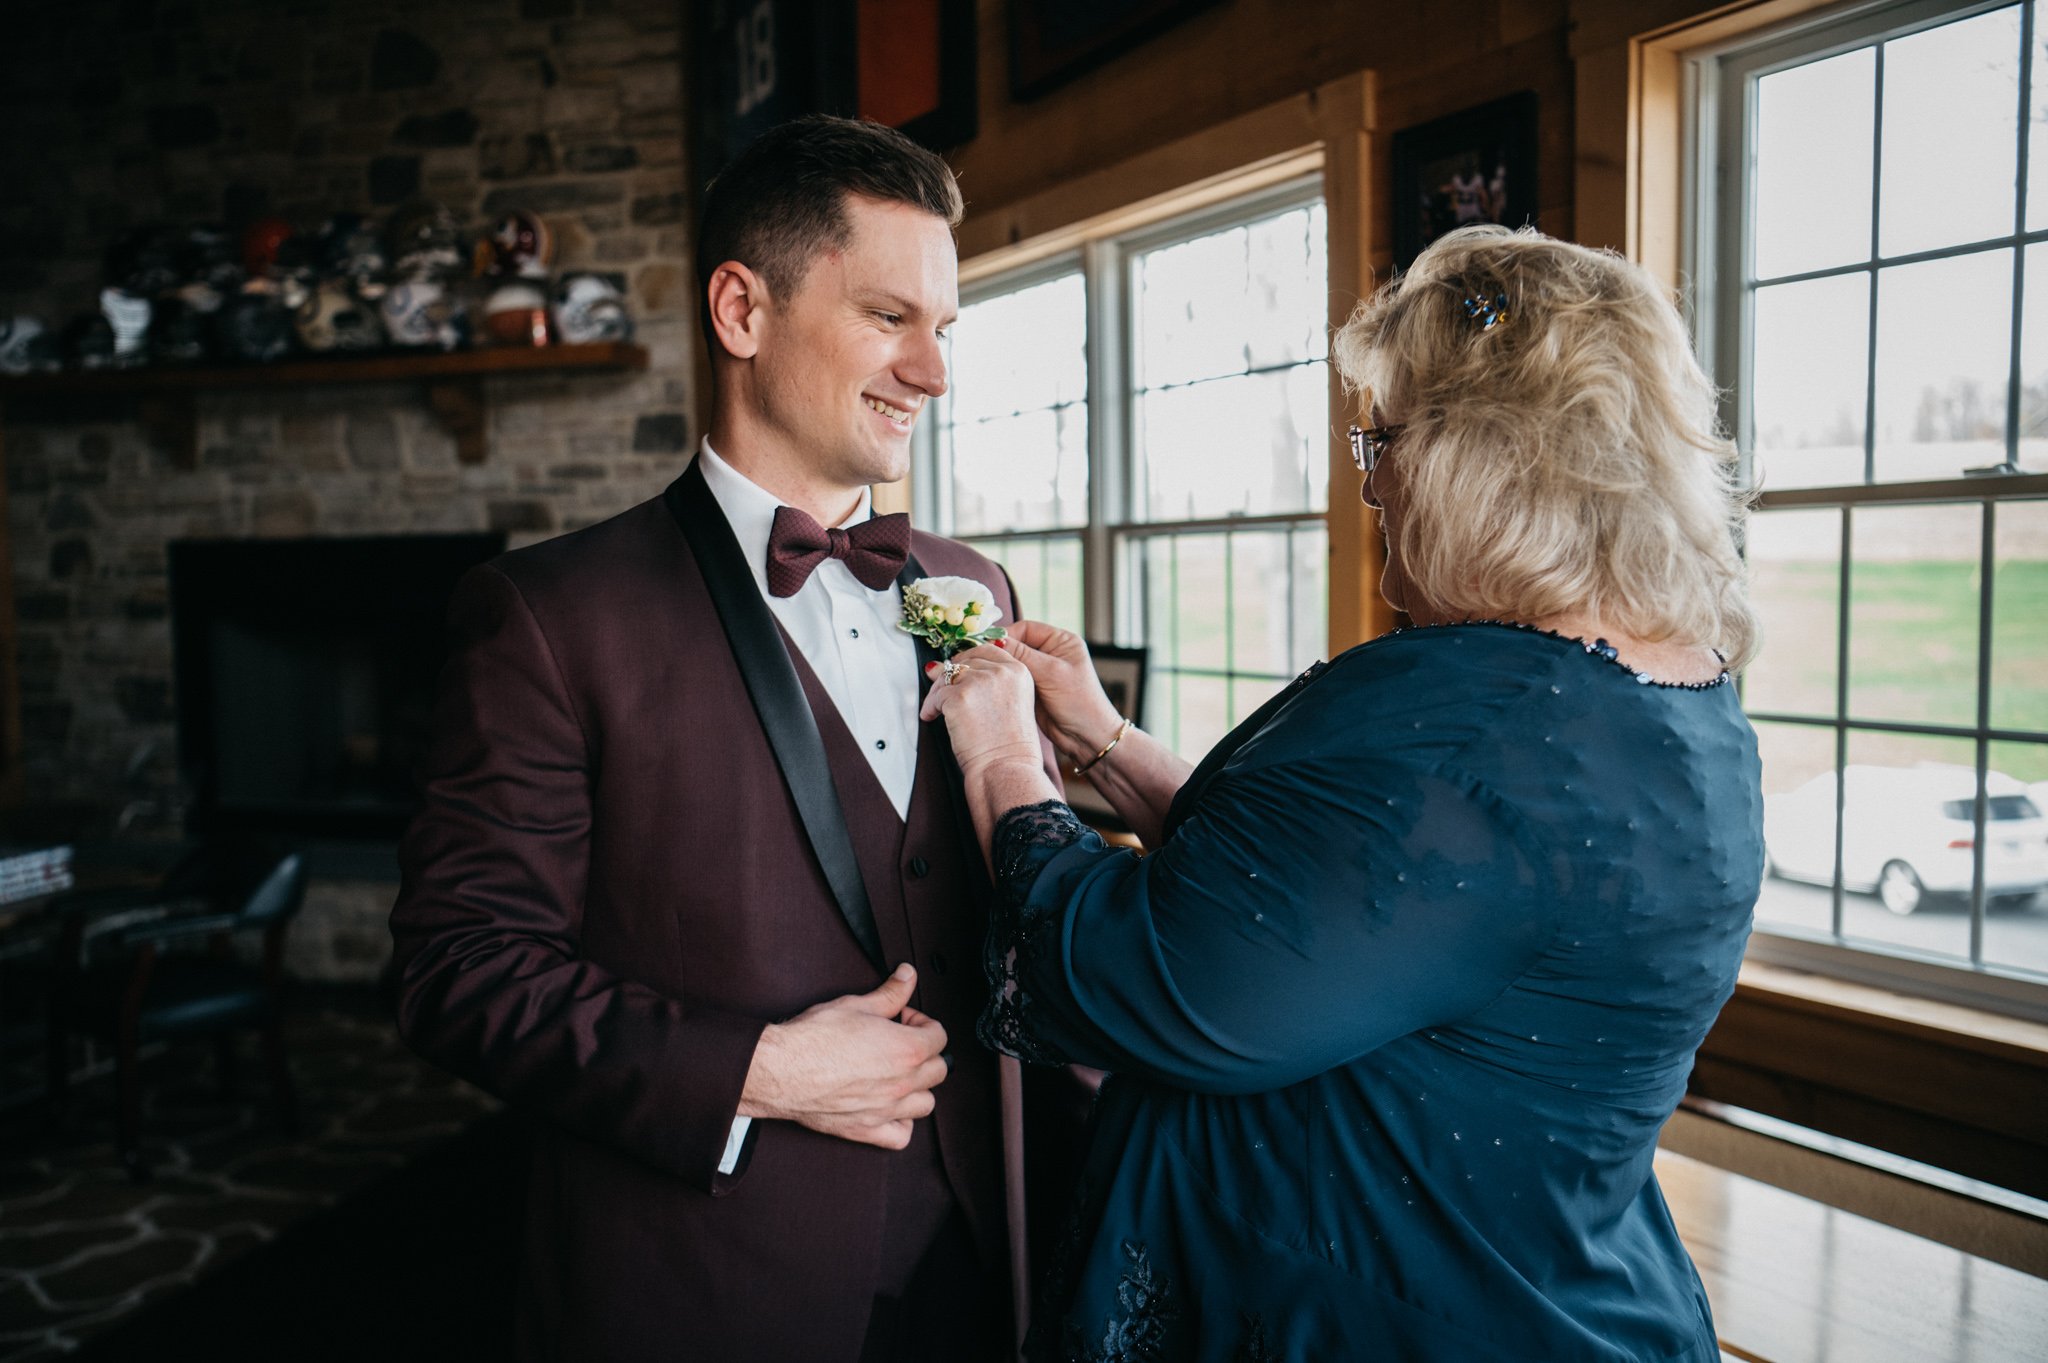 A grooms mom puts a boutonnière on her son.